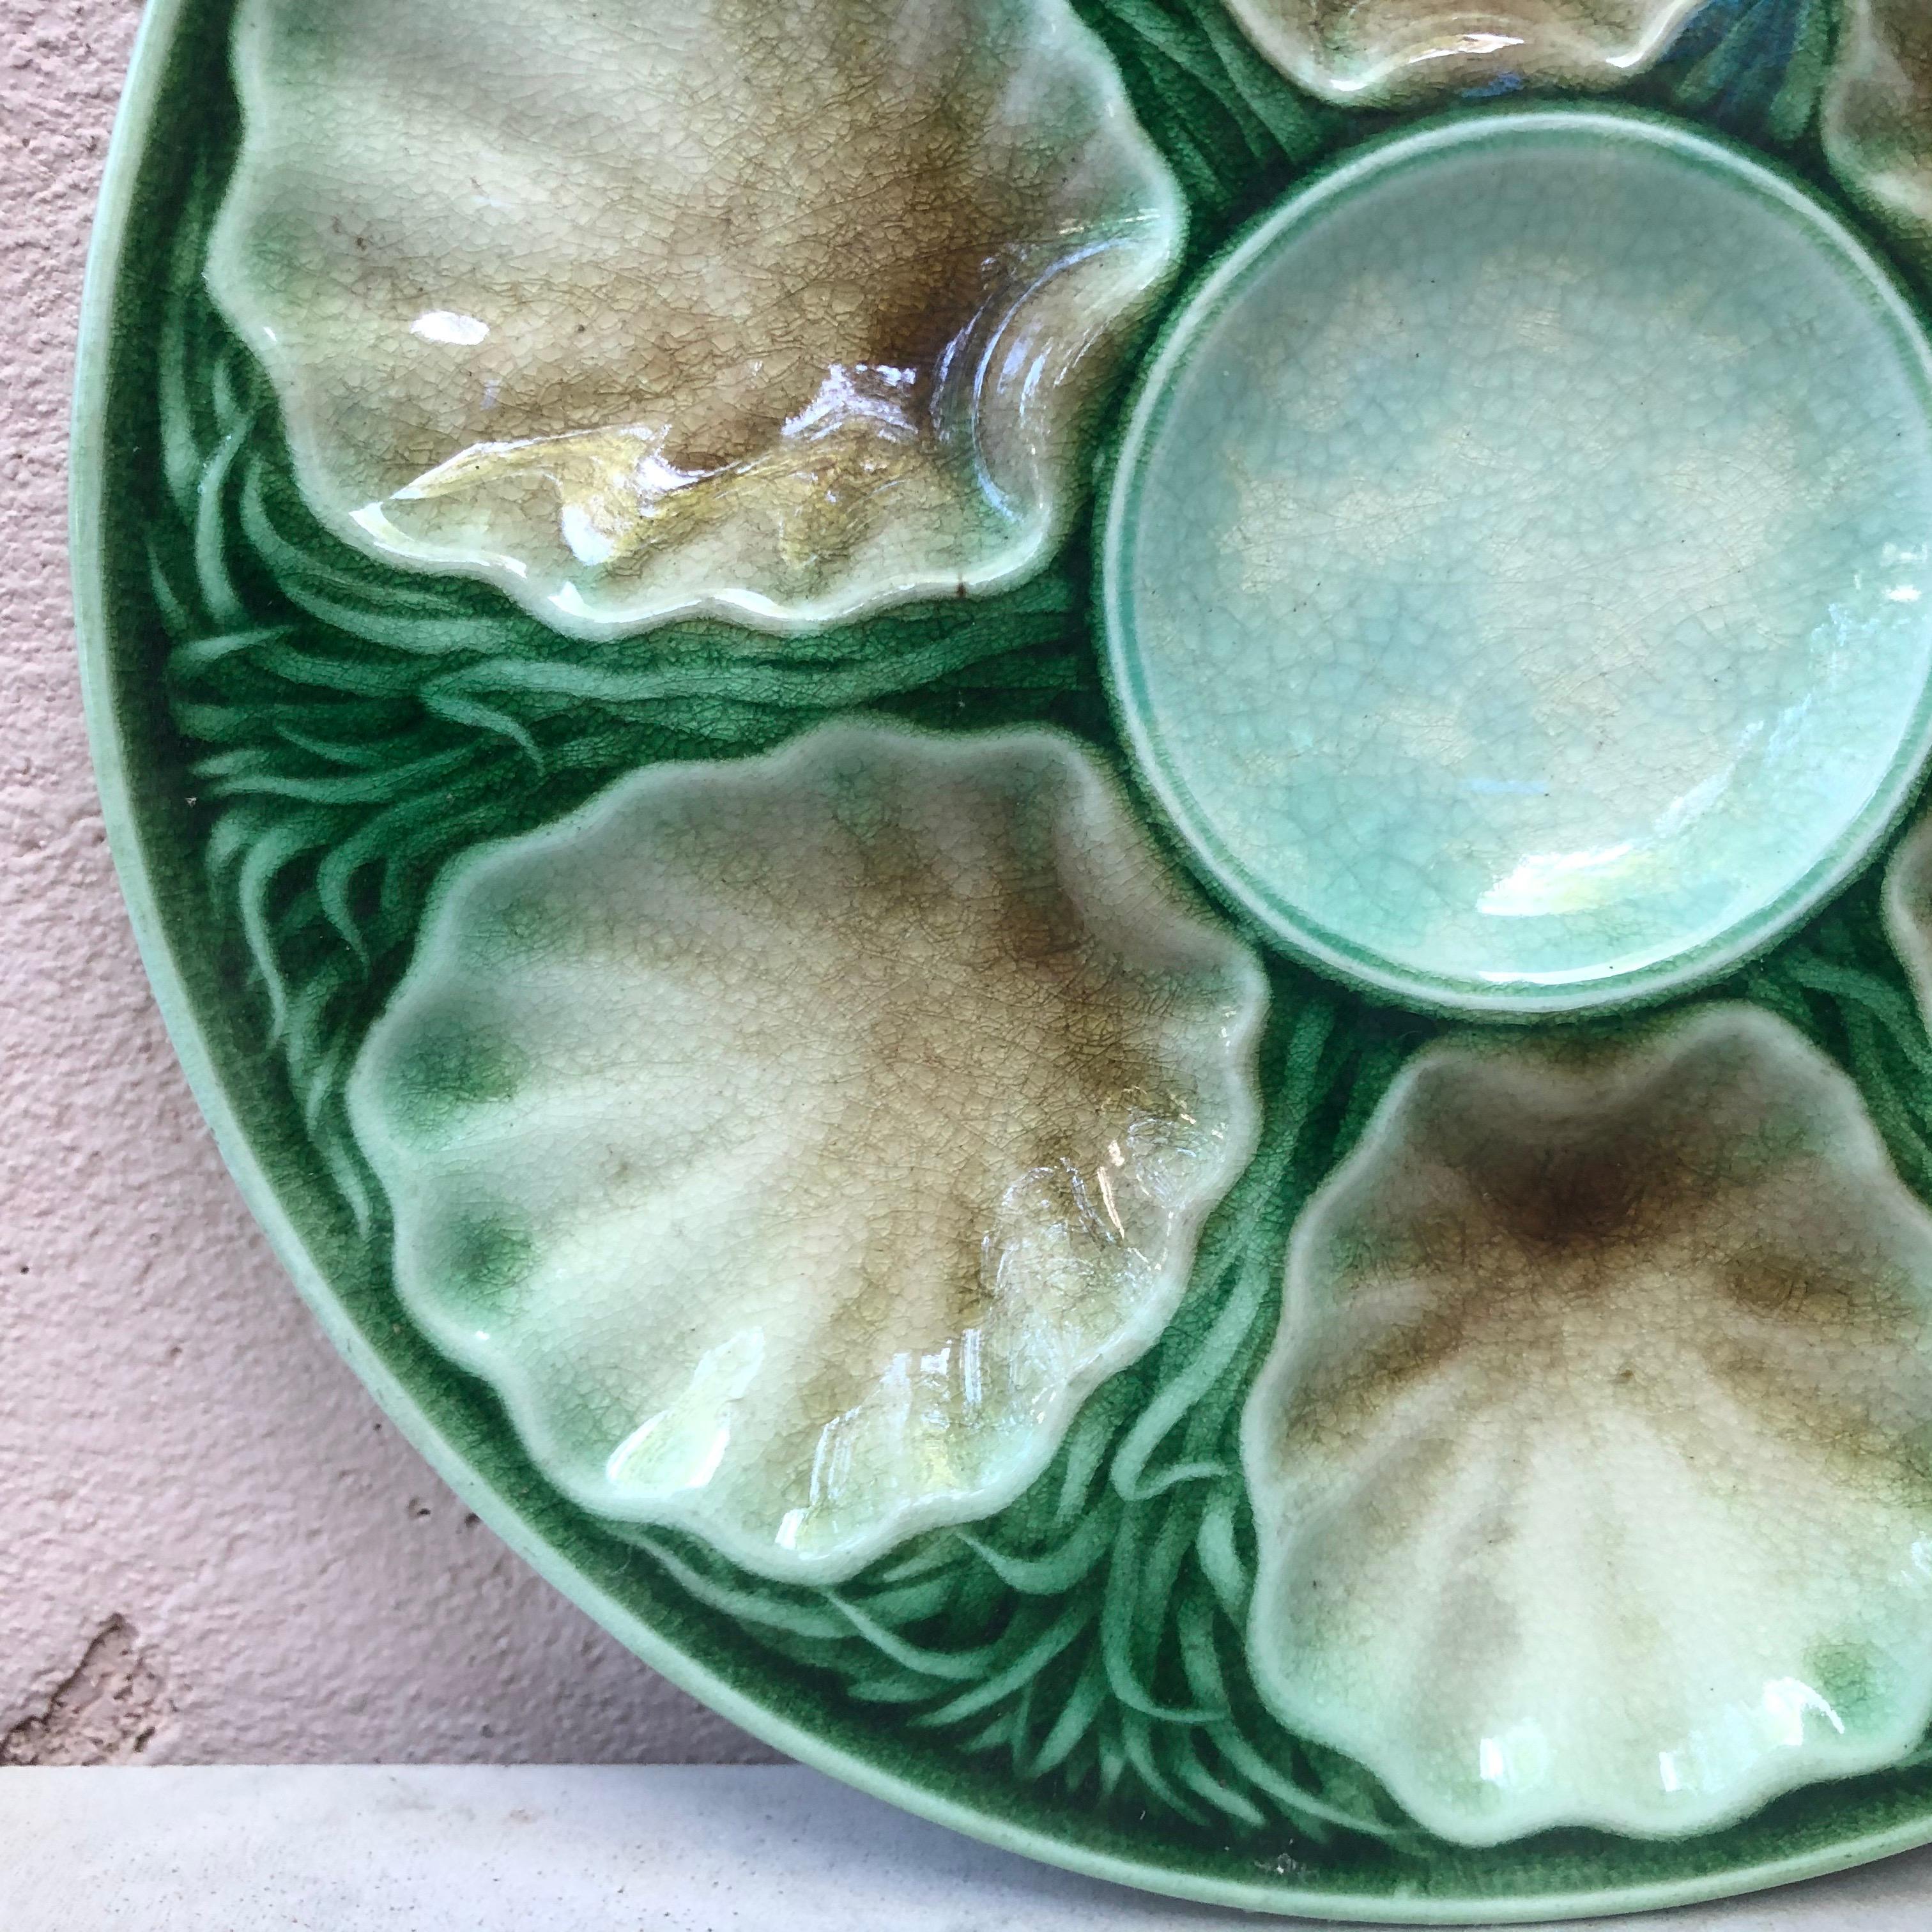 French Majolica oyster plate with seaweeds signed Salins (East of France) circa 1890.